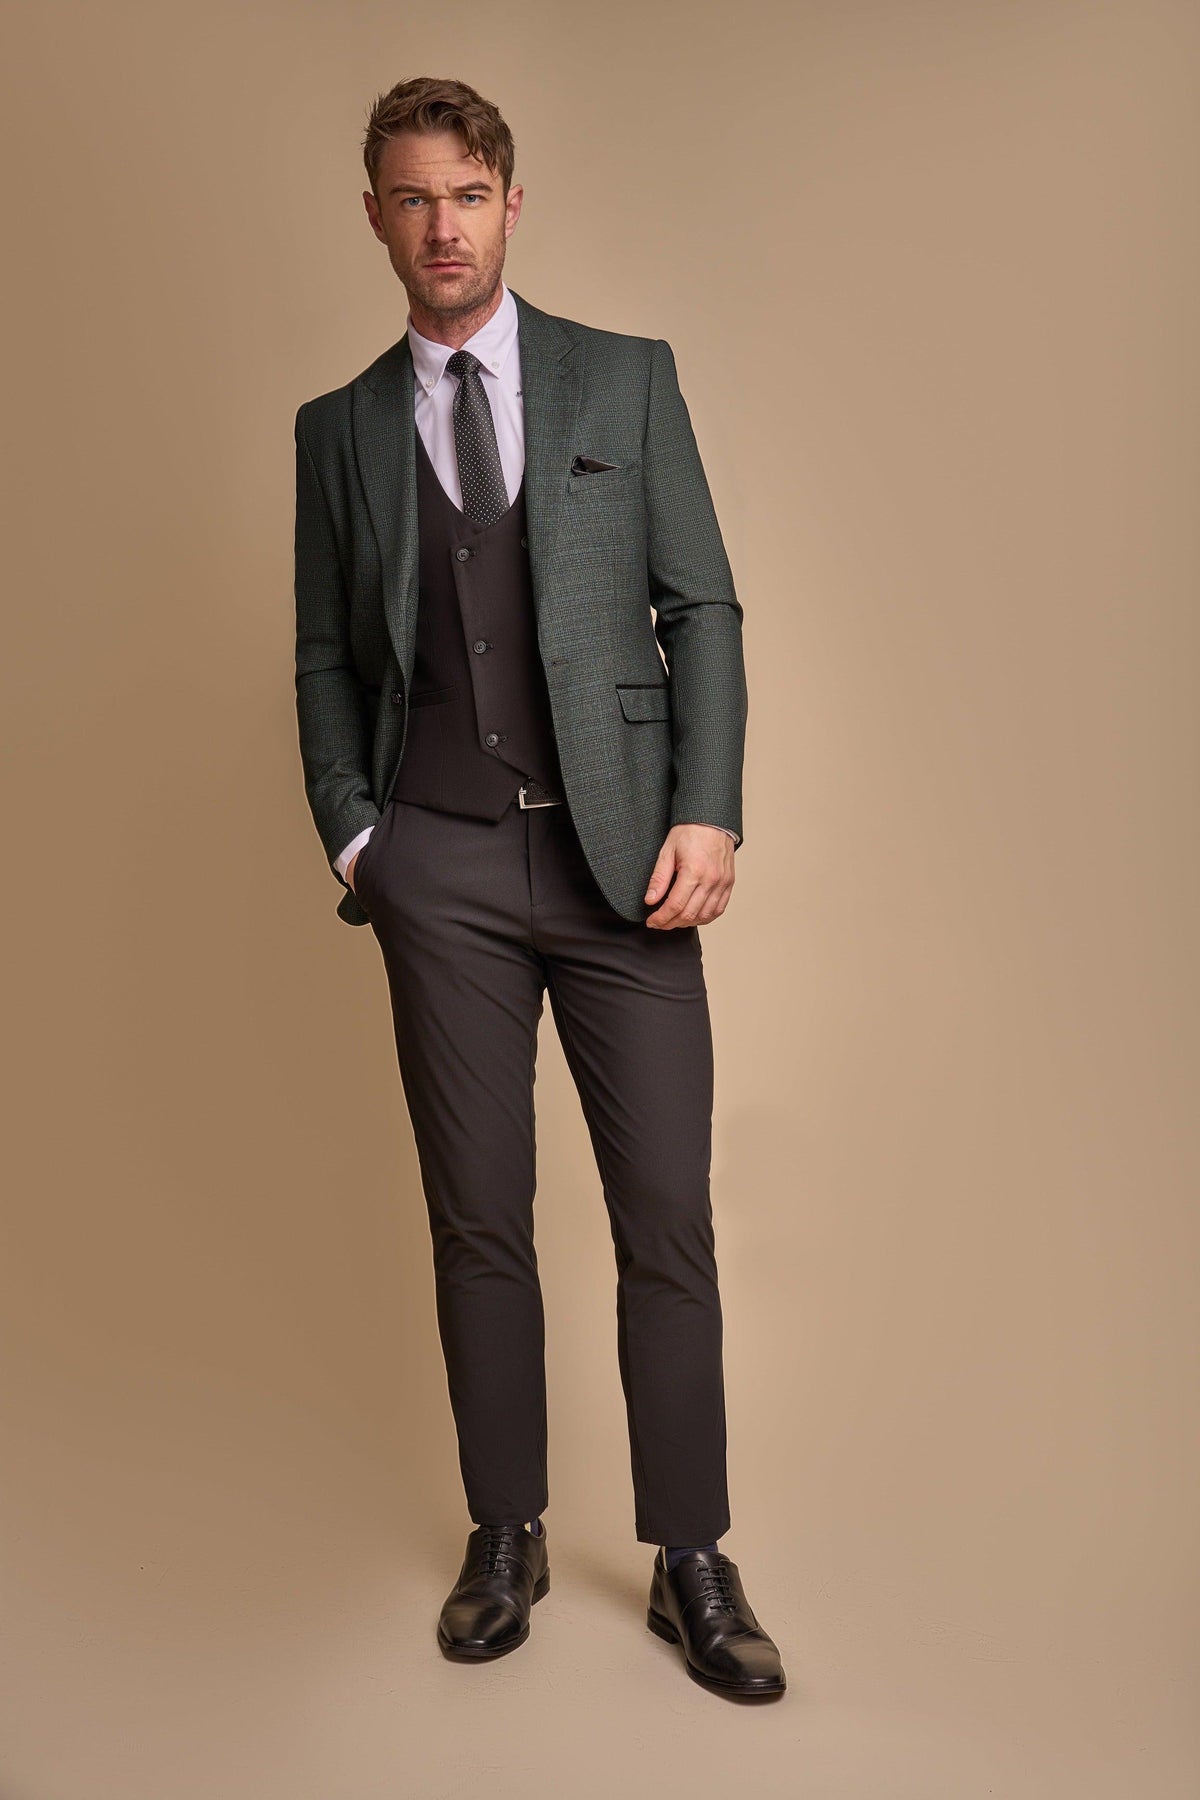 Caridi Olive With Black Waistcoat And Trousers Front 